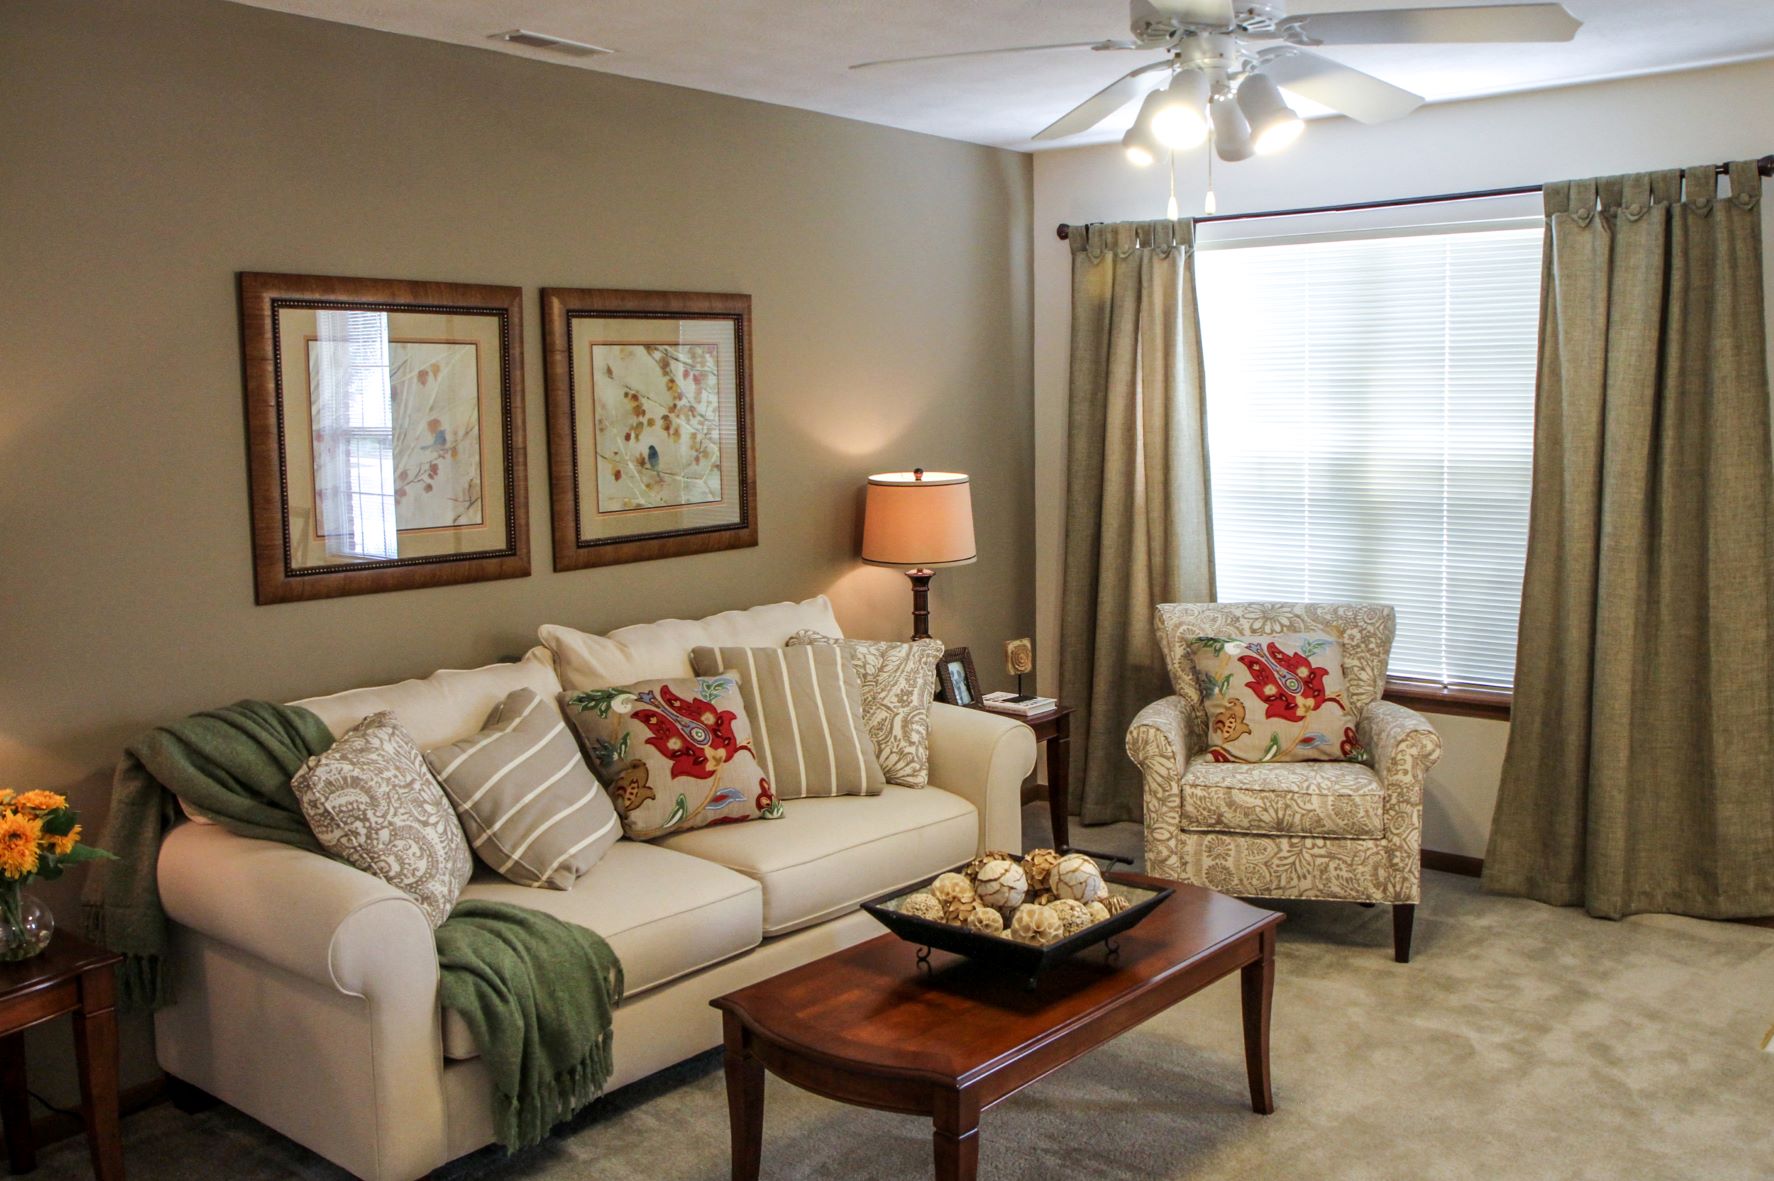 Five Star Residences of Noblesville offers comfortable living space.